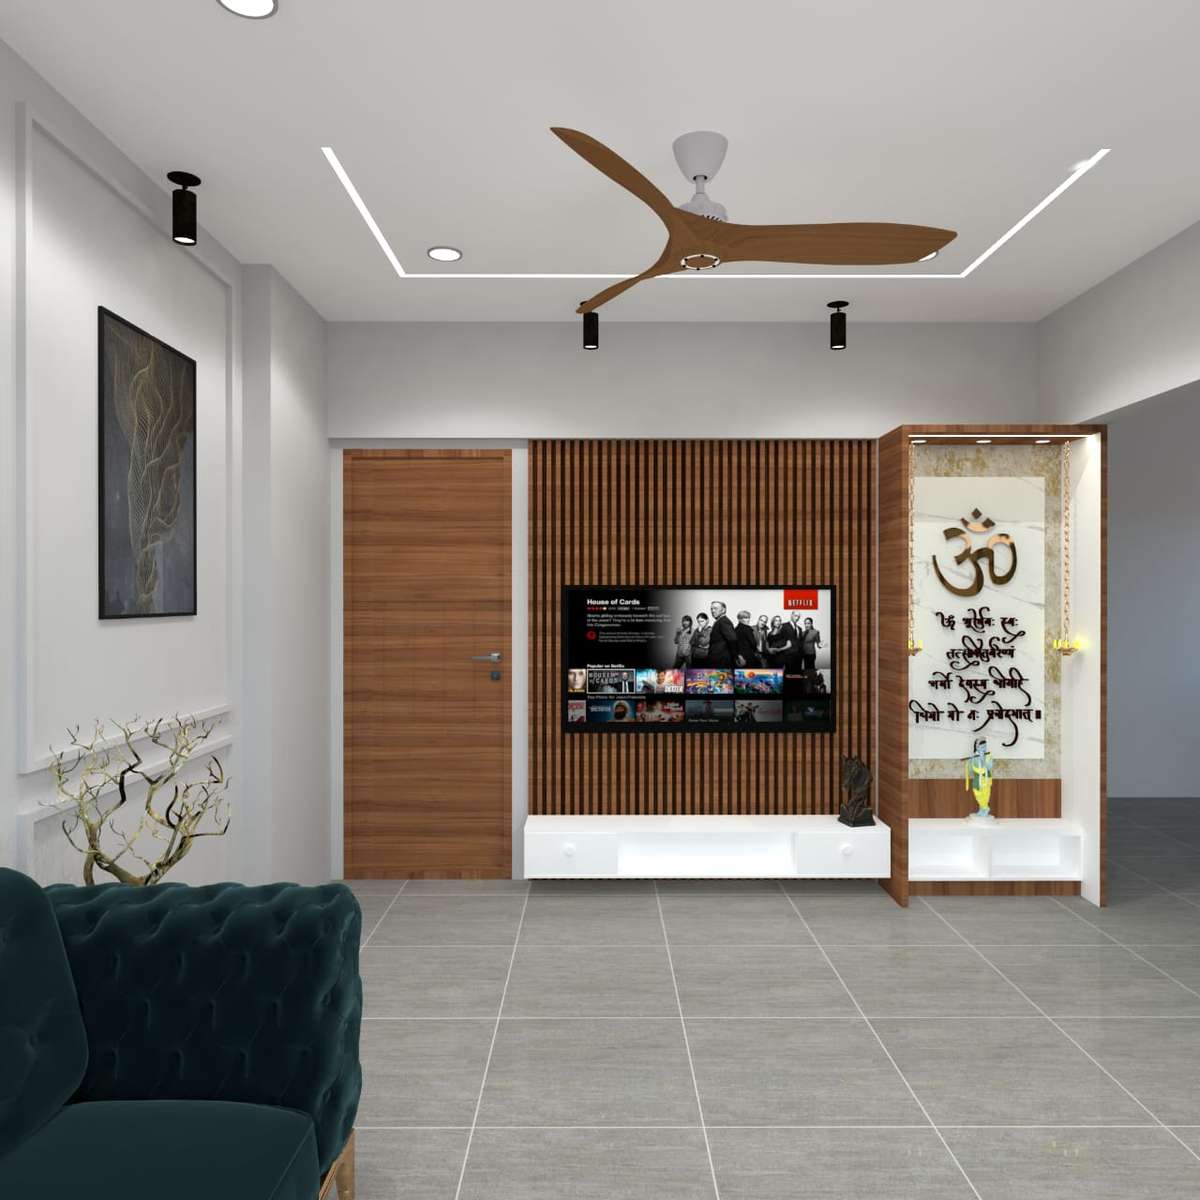 Interior 3d done by group of interior designer.
Contact for 3d Rendering and consultation At very minimal charges 
#homeinteriors #InteriorDesigner #HouseDesigns #3ddesigns